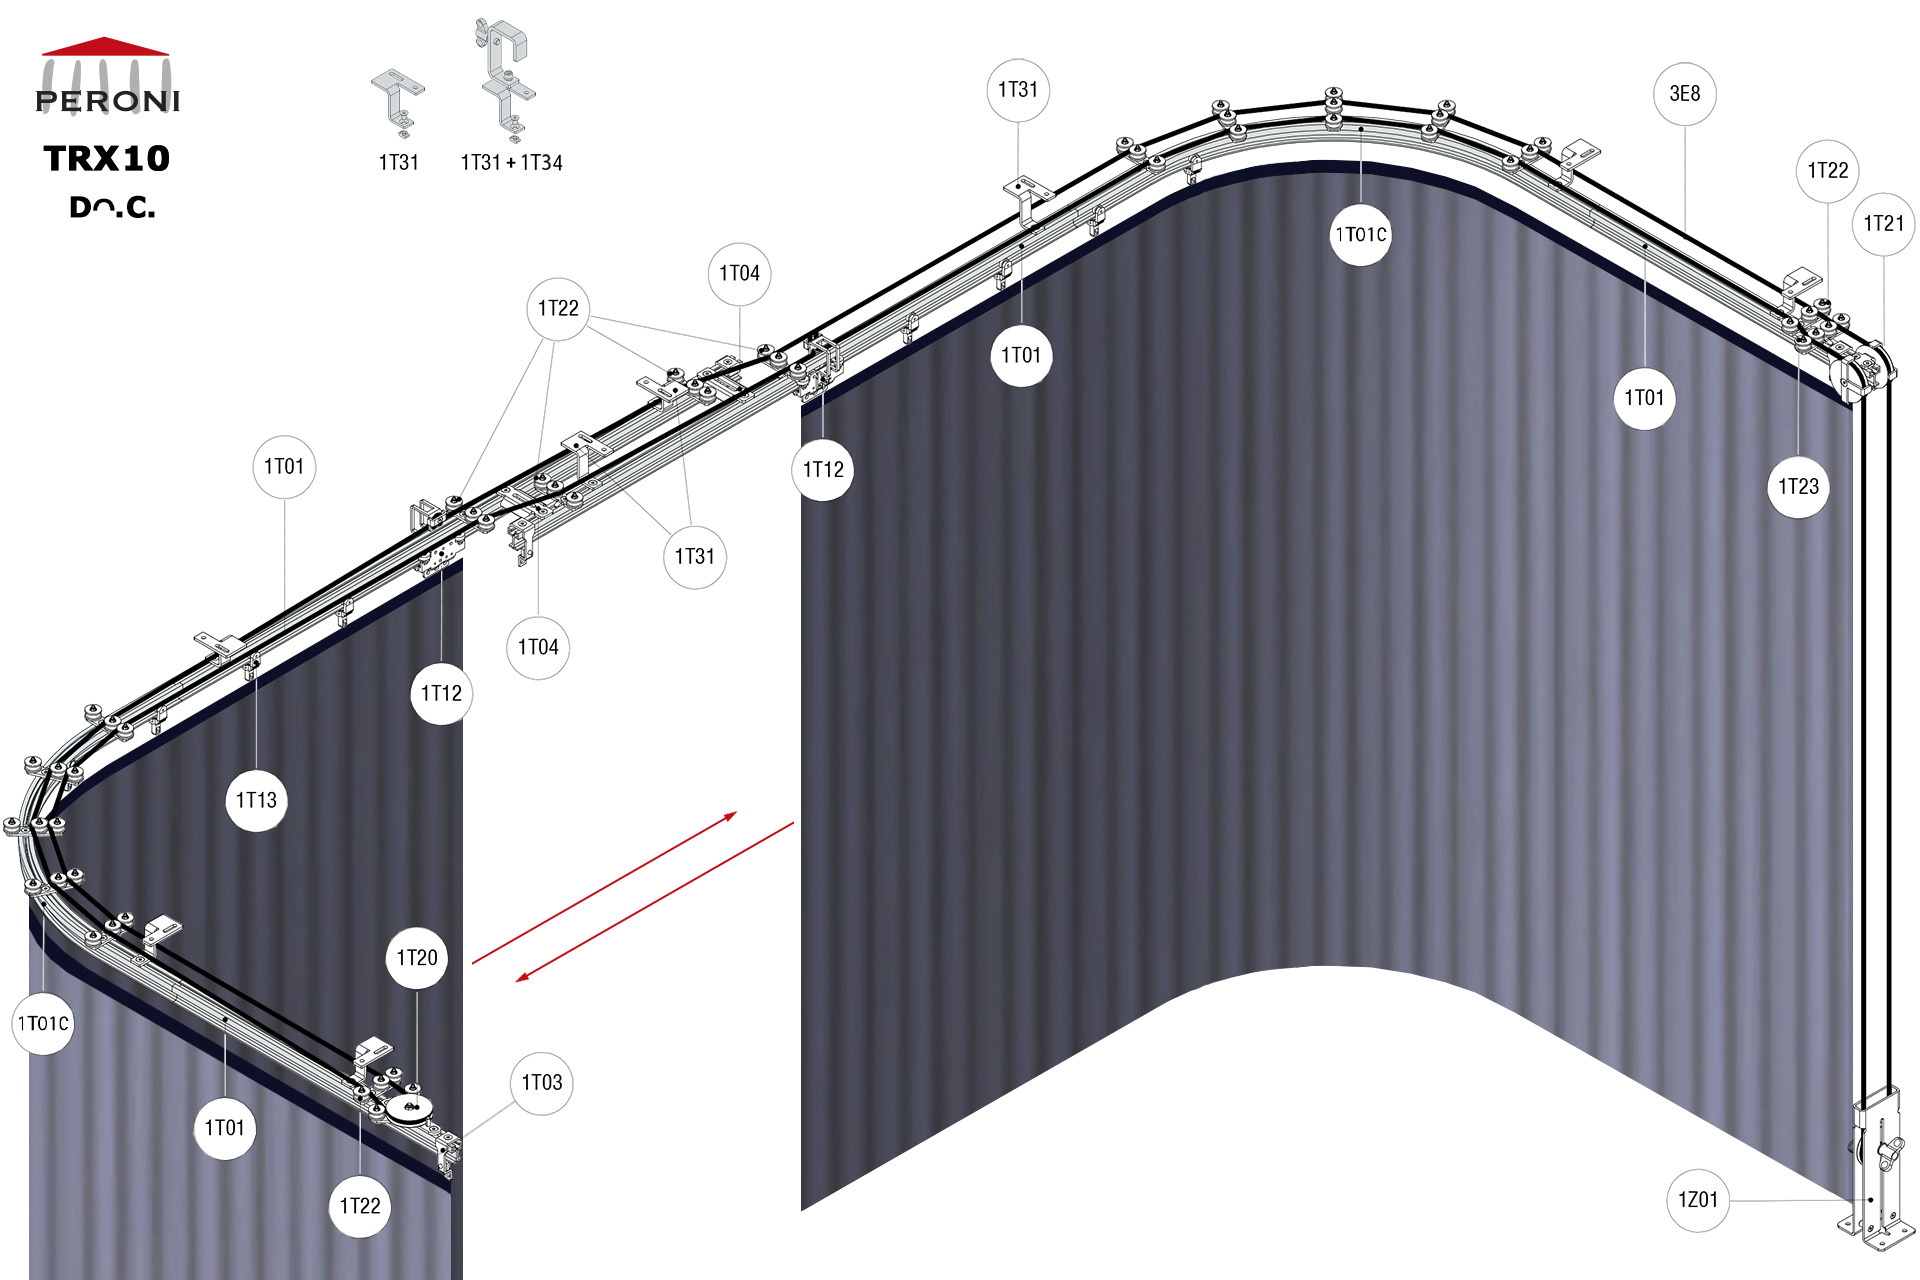 Dᴖ.C. configuration track Dᴖ. Curved double rail central openingC. Corded manualcentral overlap exceeding 50 cmComponents1T01 - Straight rail1T01C - Curved rail1T02 - Connection set1T03 - End stop1T04 - Spacer plate1T12 - Top cord master carrier1T13 - 2 wheel runnerMotion control1T20 - Return pulley1T21 - Head double pulley1T22 - Top cord guide1T23 - Top cord aligner1Z01 - See all options3E - Poly rope Ø 8 mm